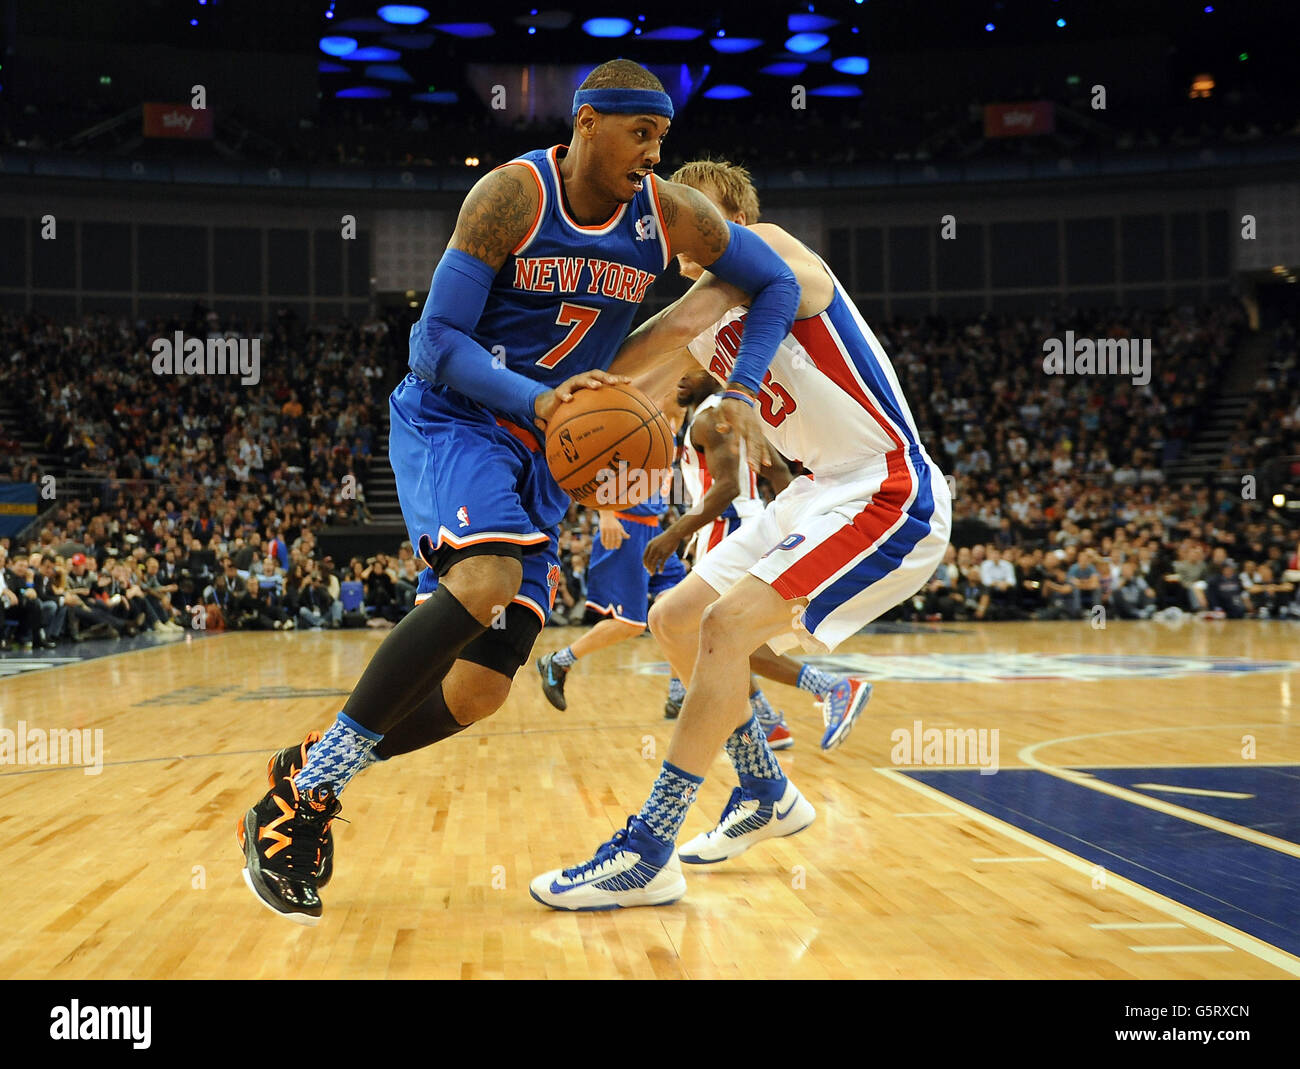 New York Knicks' Carmelo Anthony (left) gets away from Detroit Pistons' Kyle Singler during the 2013 NBA London Live match at the O2 Arena, London. Stock Photo